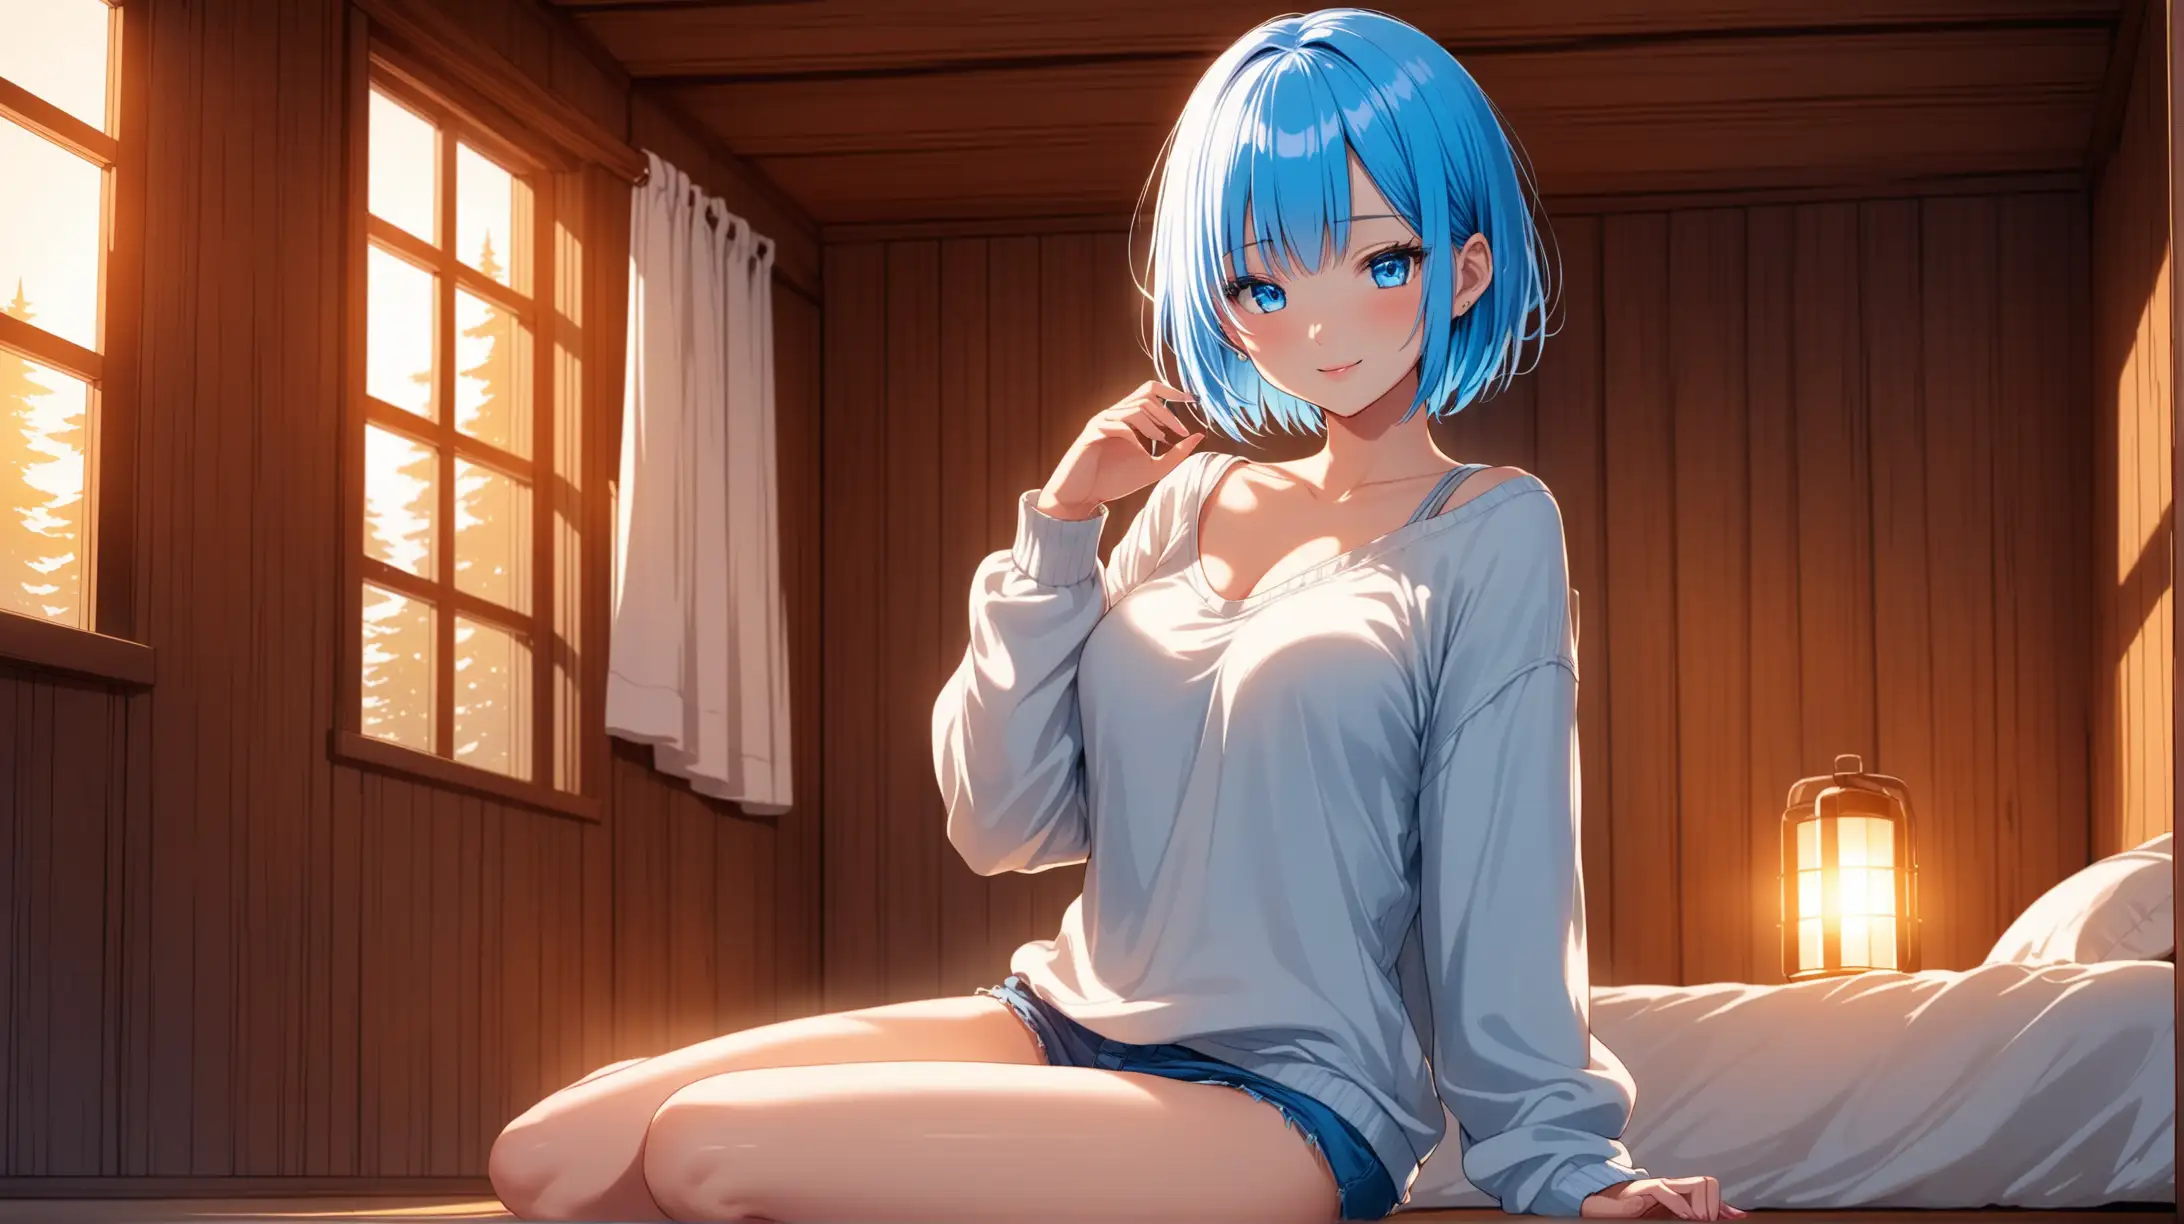 Draw the character Rem, blue eyes, high quality, indoors, cabin, ambient lighting, long shot, in a seductive pose, wearing a casual outfit, looking at the viewer with a loving smile